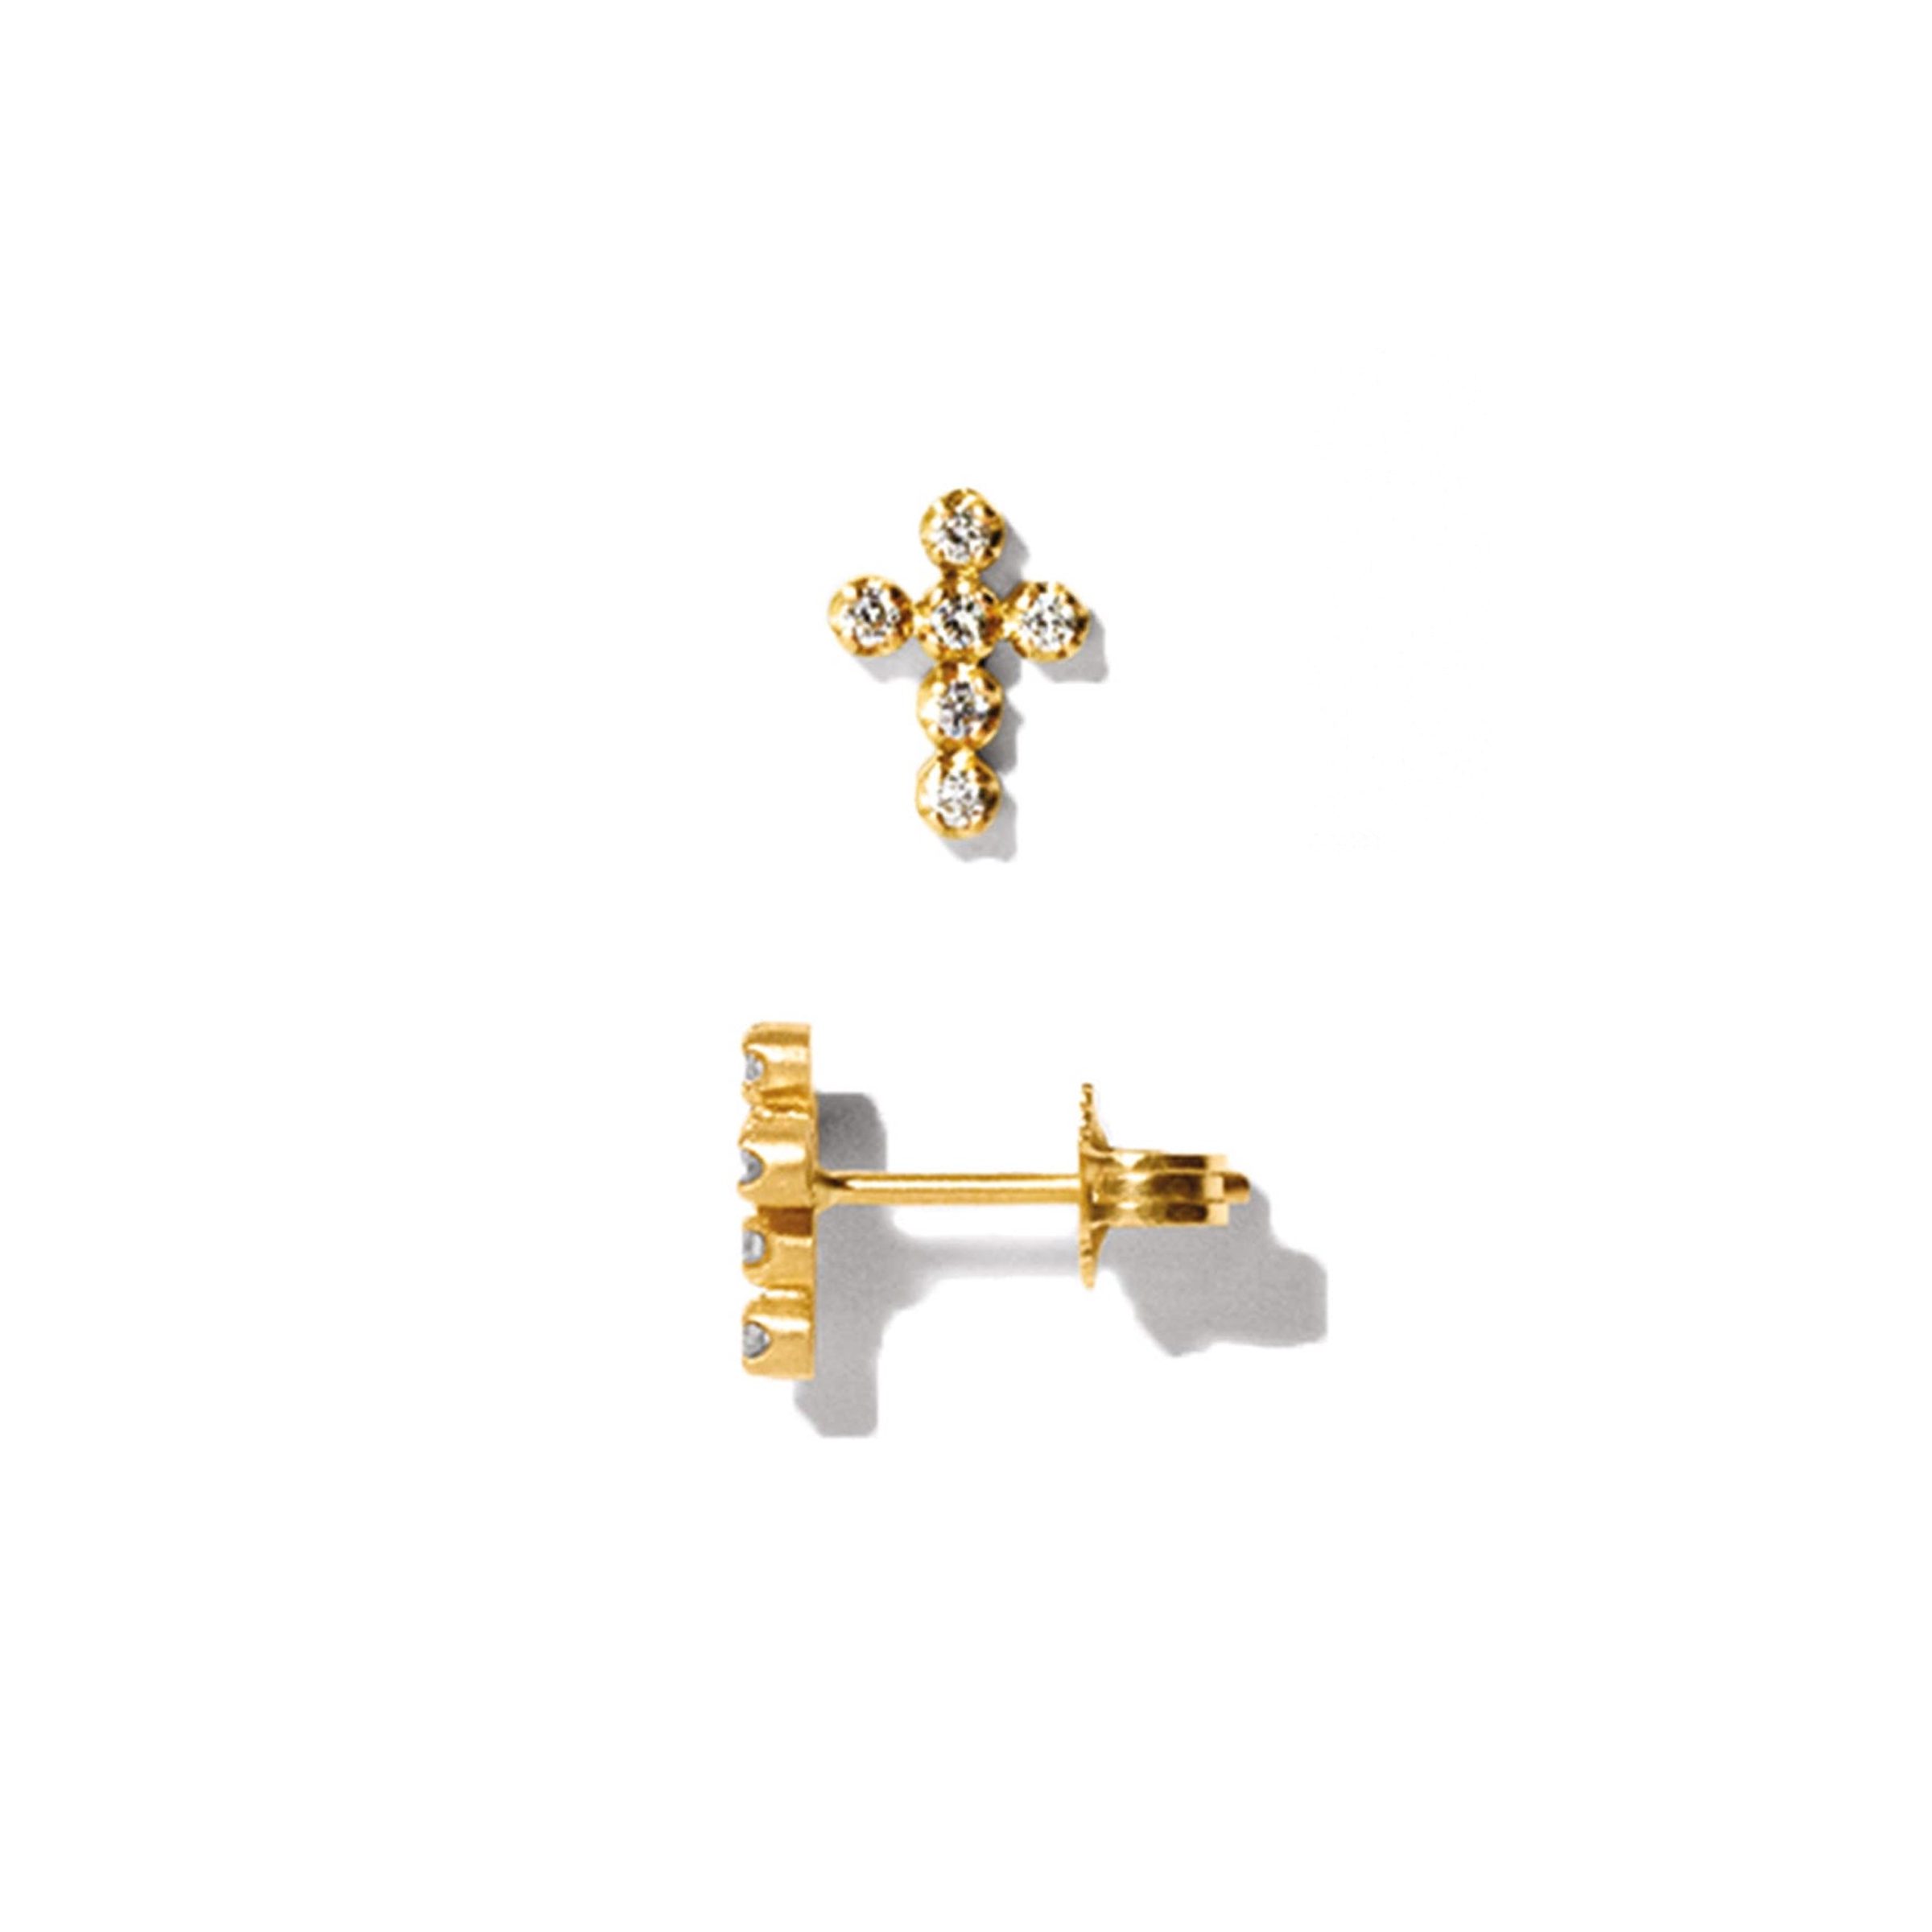 MISS EMPSON gold cross ear stud with small diamonds